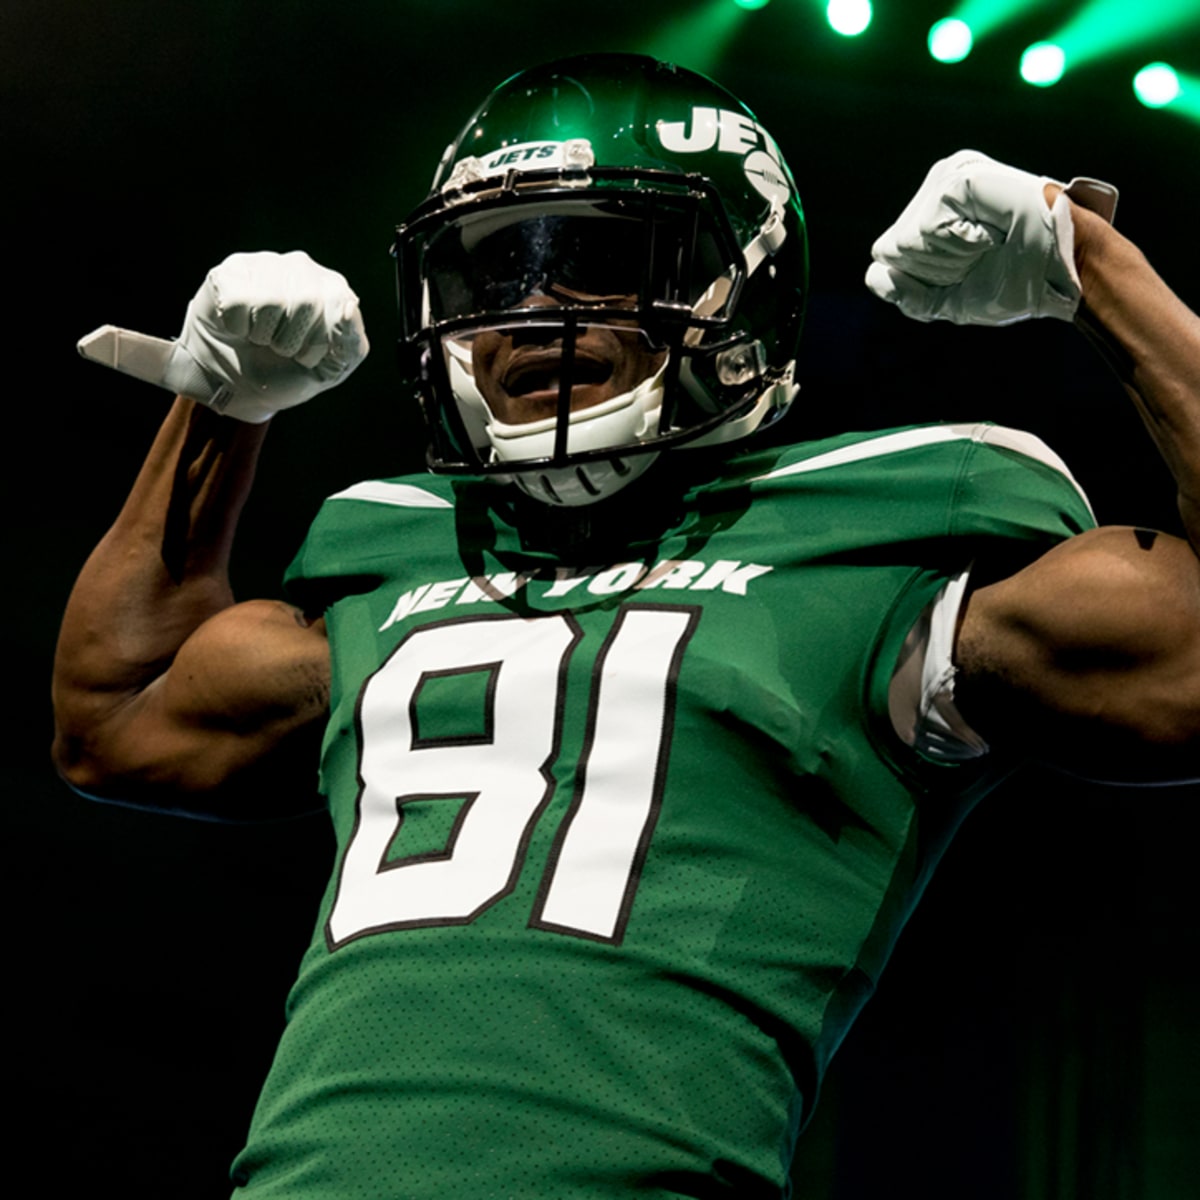 The New York Jets' new uniform designs, as reviewed by an artist 